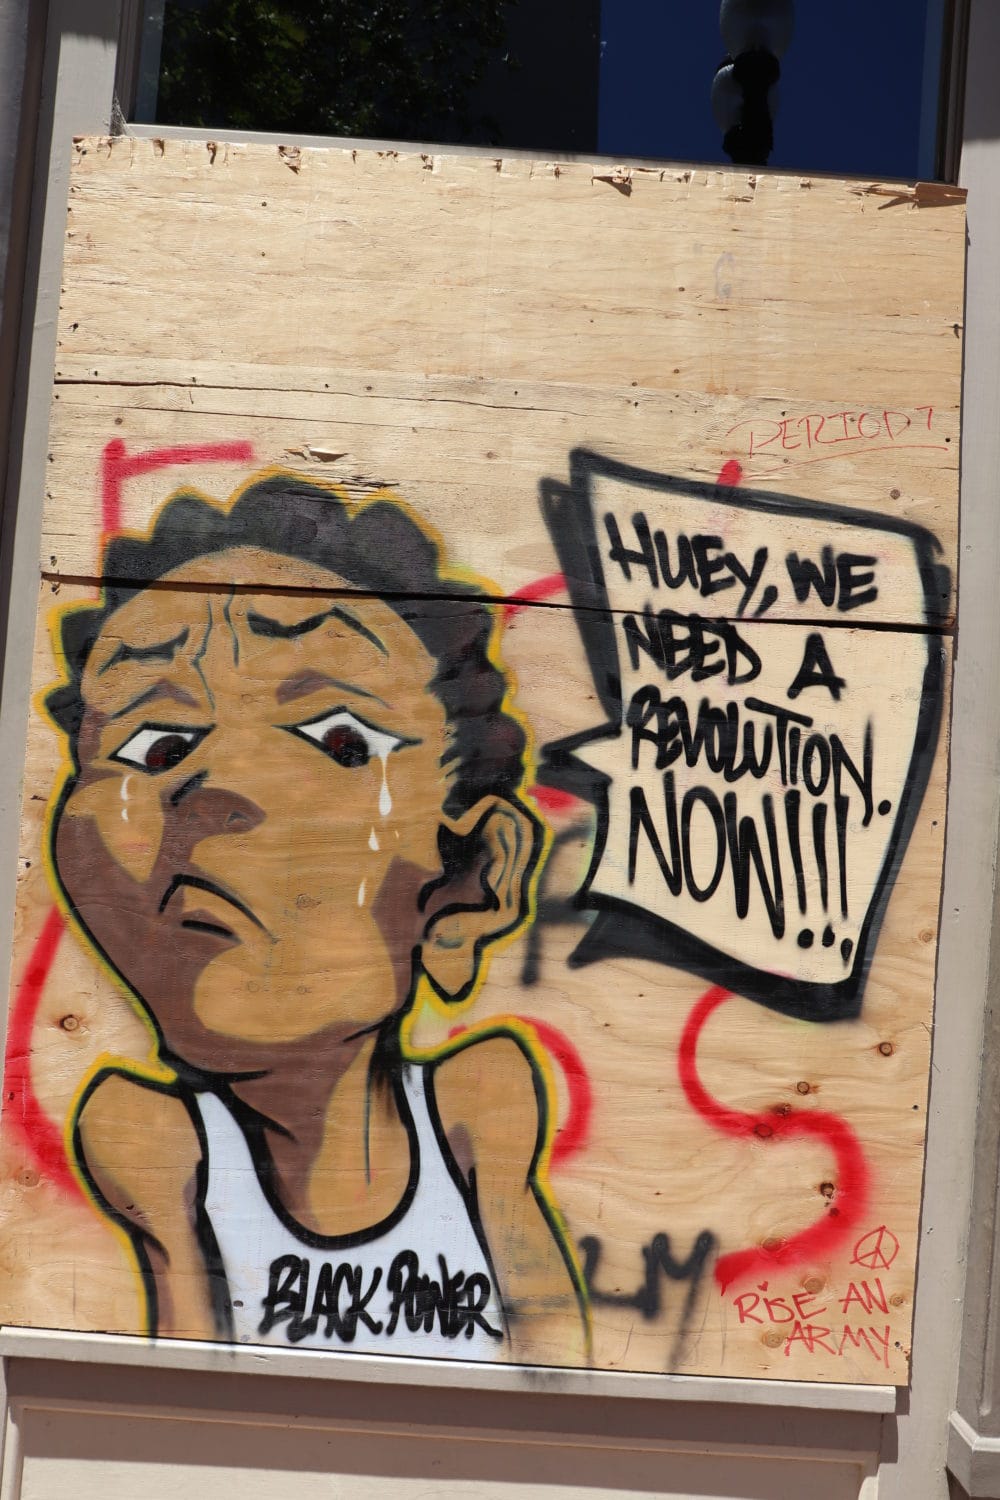 Huey-we-need-a-revolution-now’-mural-on-boarded-up-window-Oakland-0720-by-JR-1, The July expiration of the COVID-19 eviction ban and unemployment bonus leads to calls for a General Strike, Local News & Views 